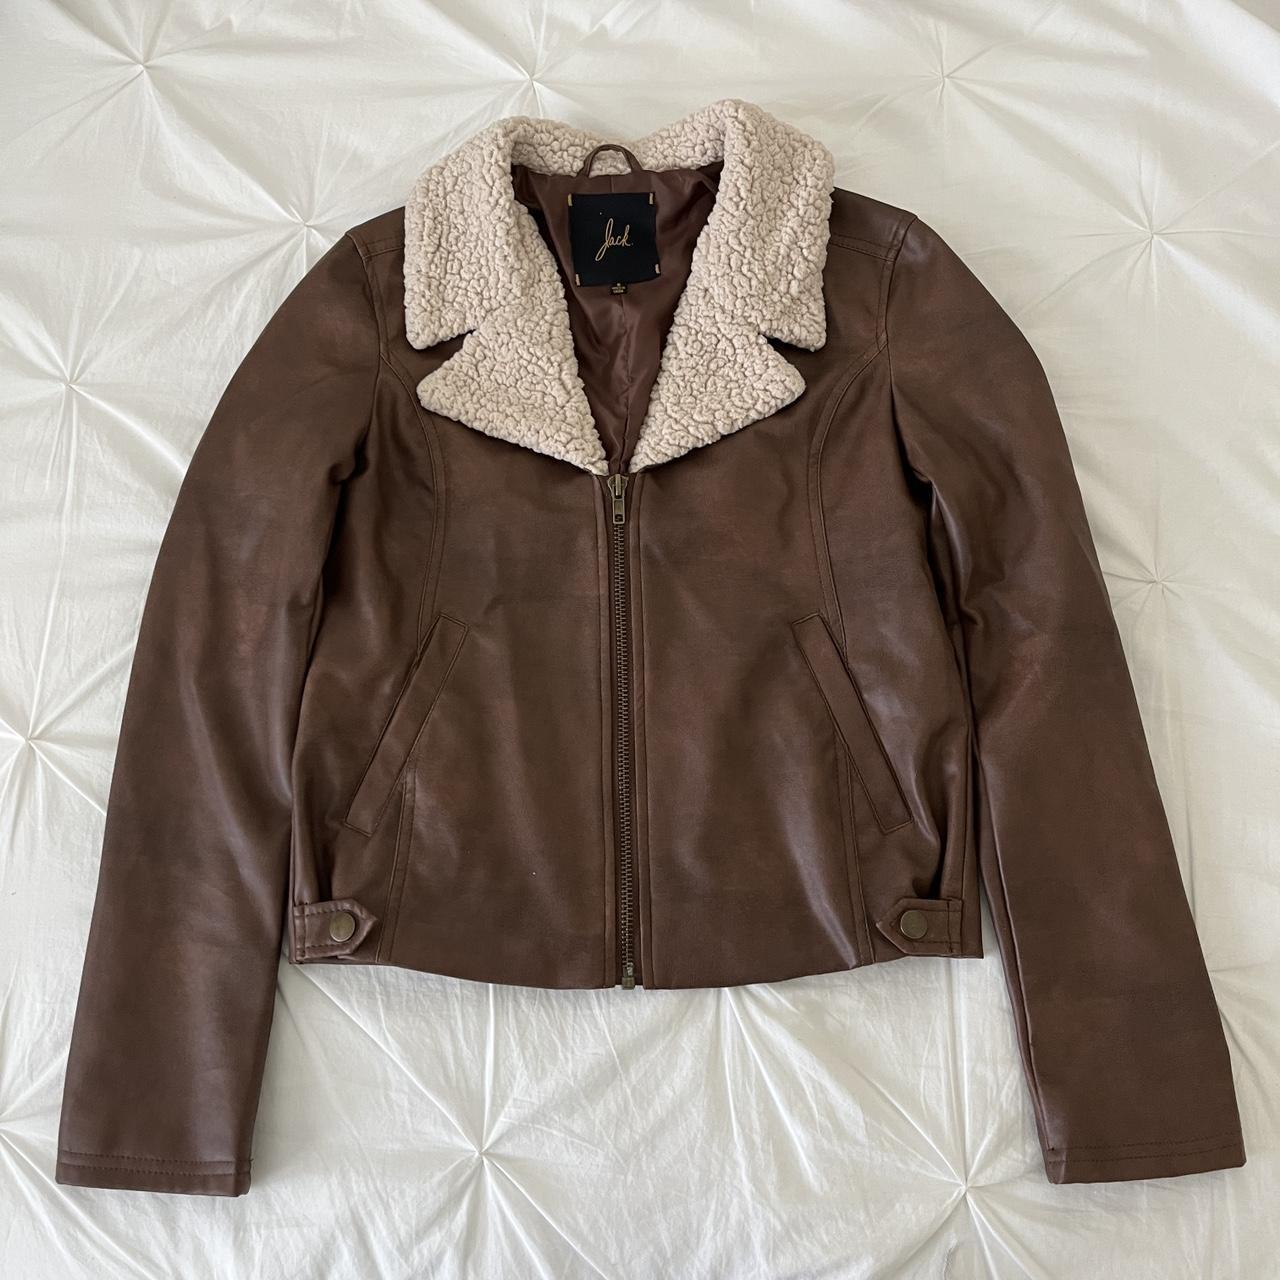 Brown faux leather jacket with fur collar size:... - Depop